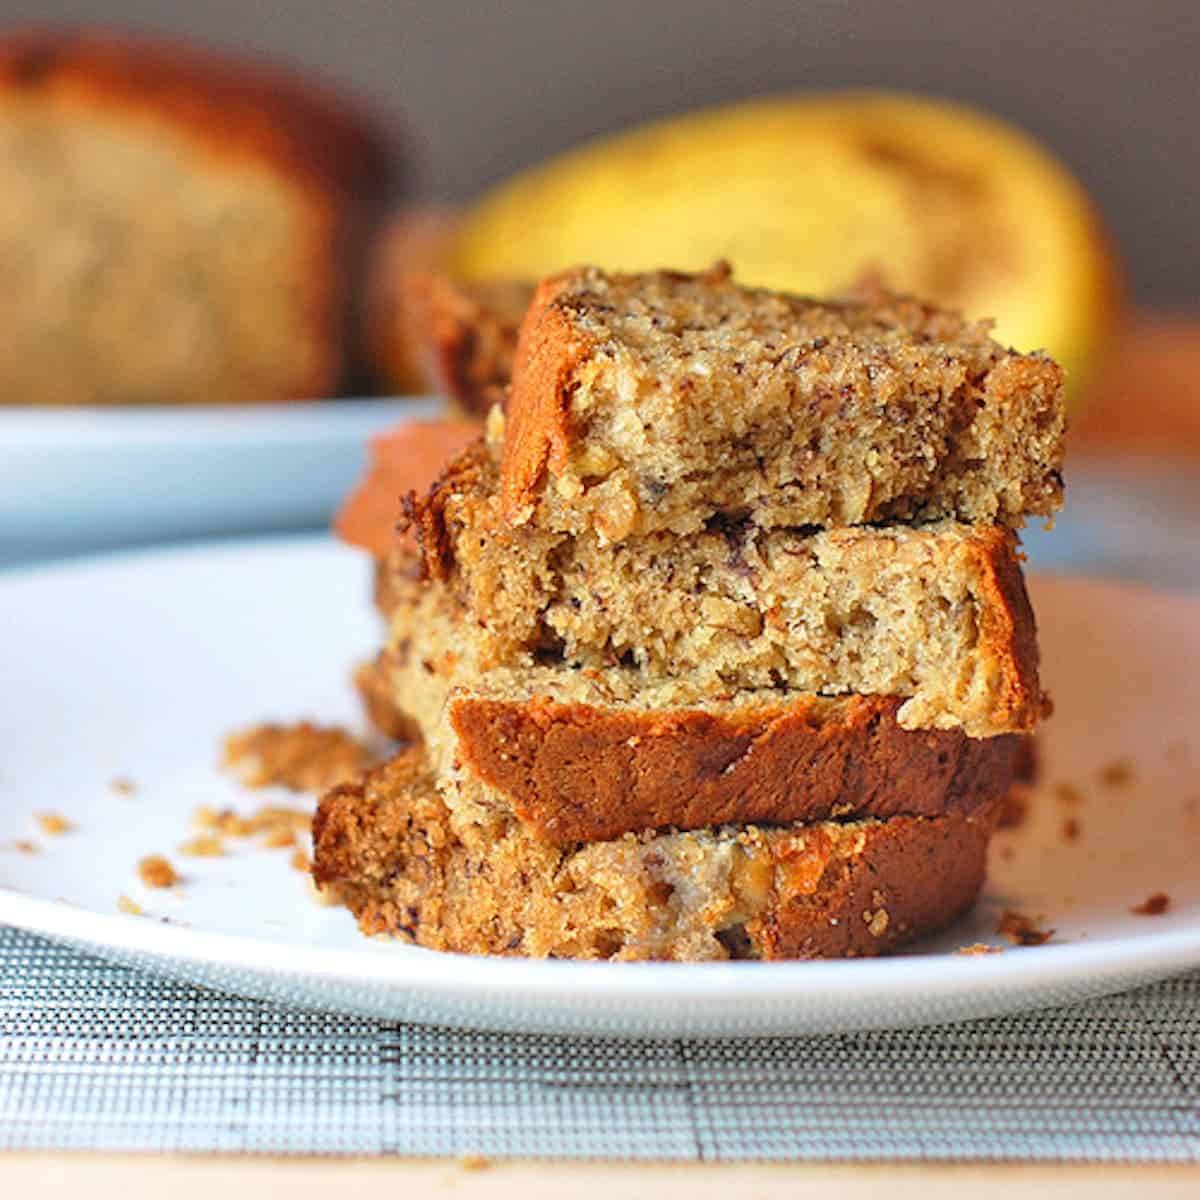 Maple banana bread stacked on a plate.